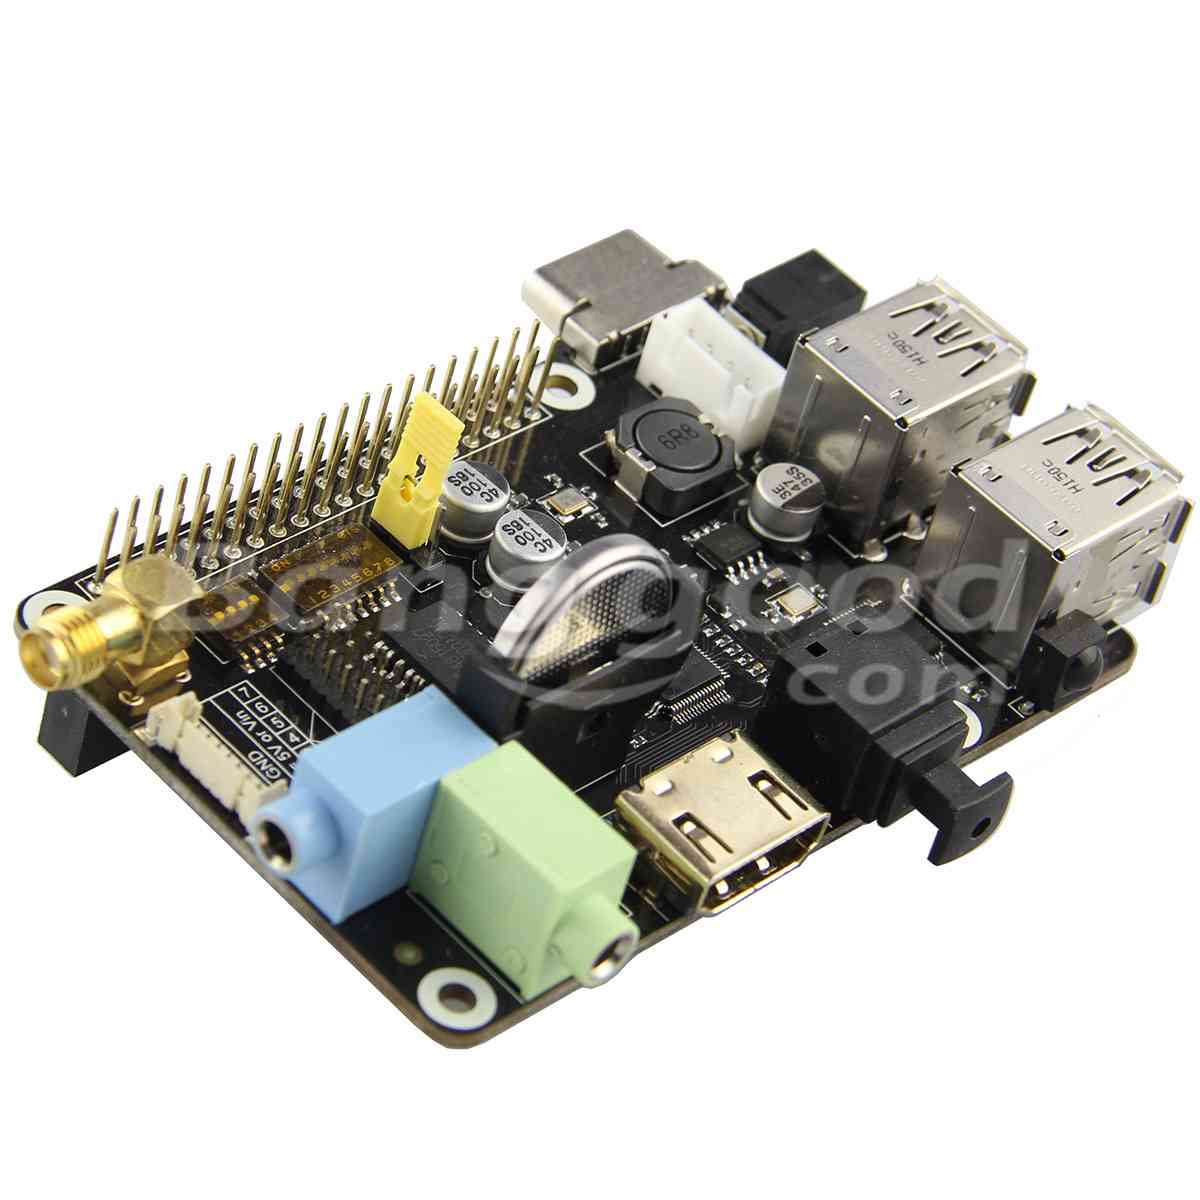 Supstronics-X200-Multifunction-Expansion-Board-For-Raspberry-Pi-B-960113